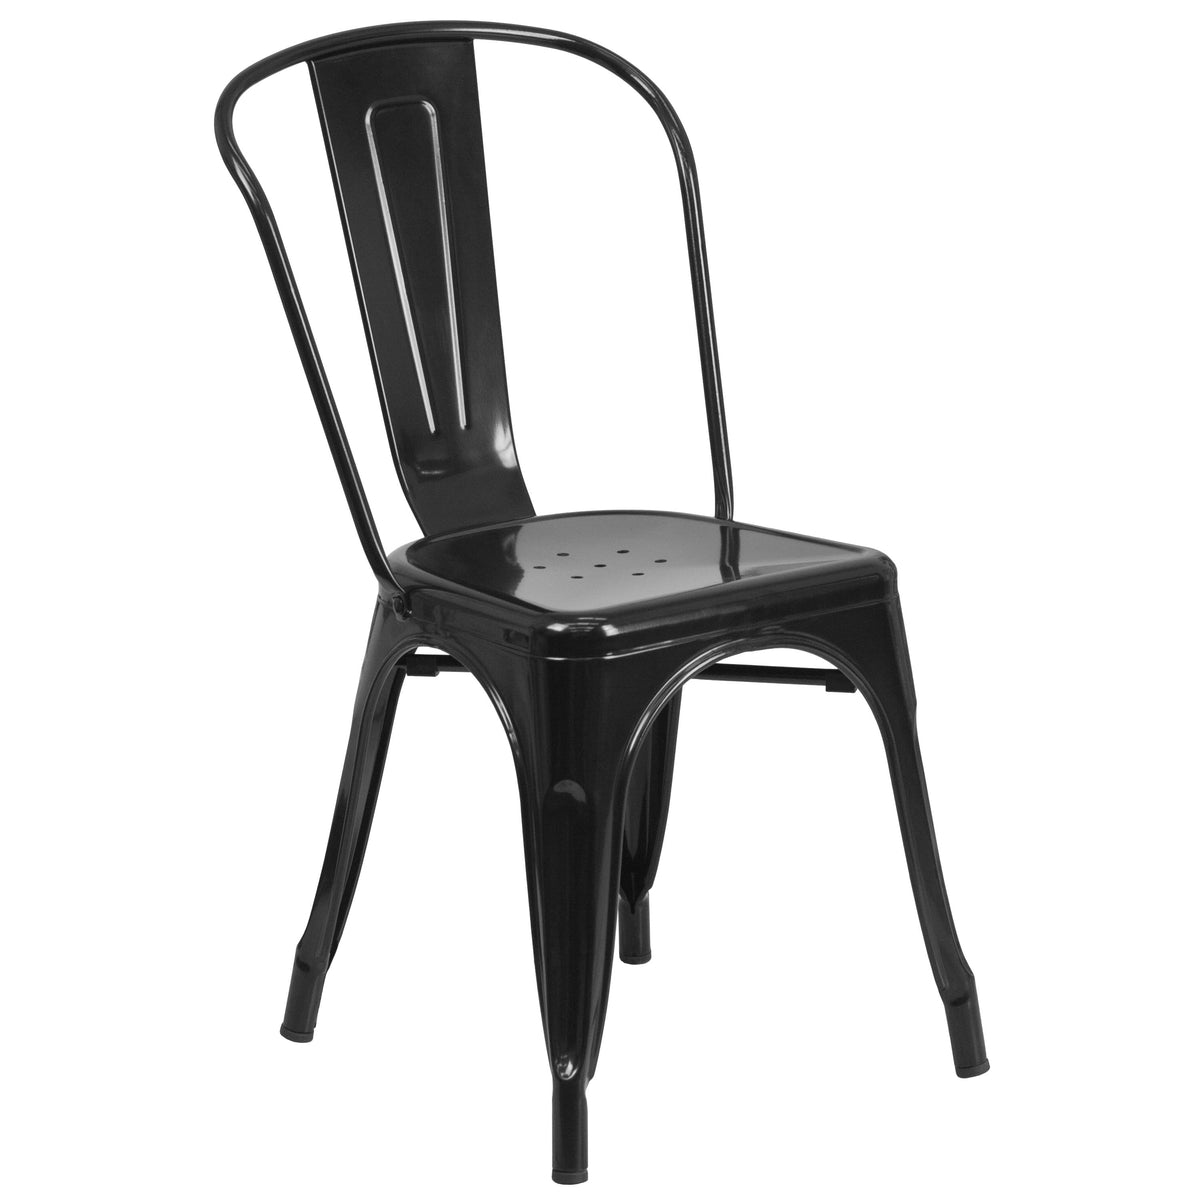 Black |#| 30inch Round Black Metal Indoor-Outdoor Table Set with 2 Cafe Chairs